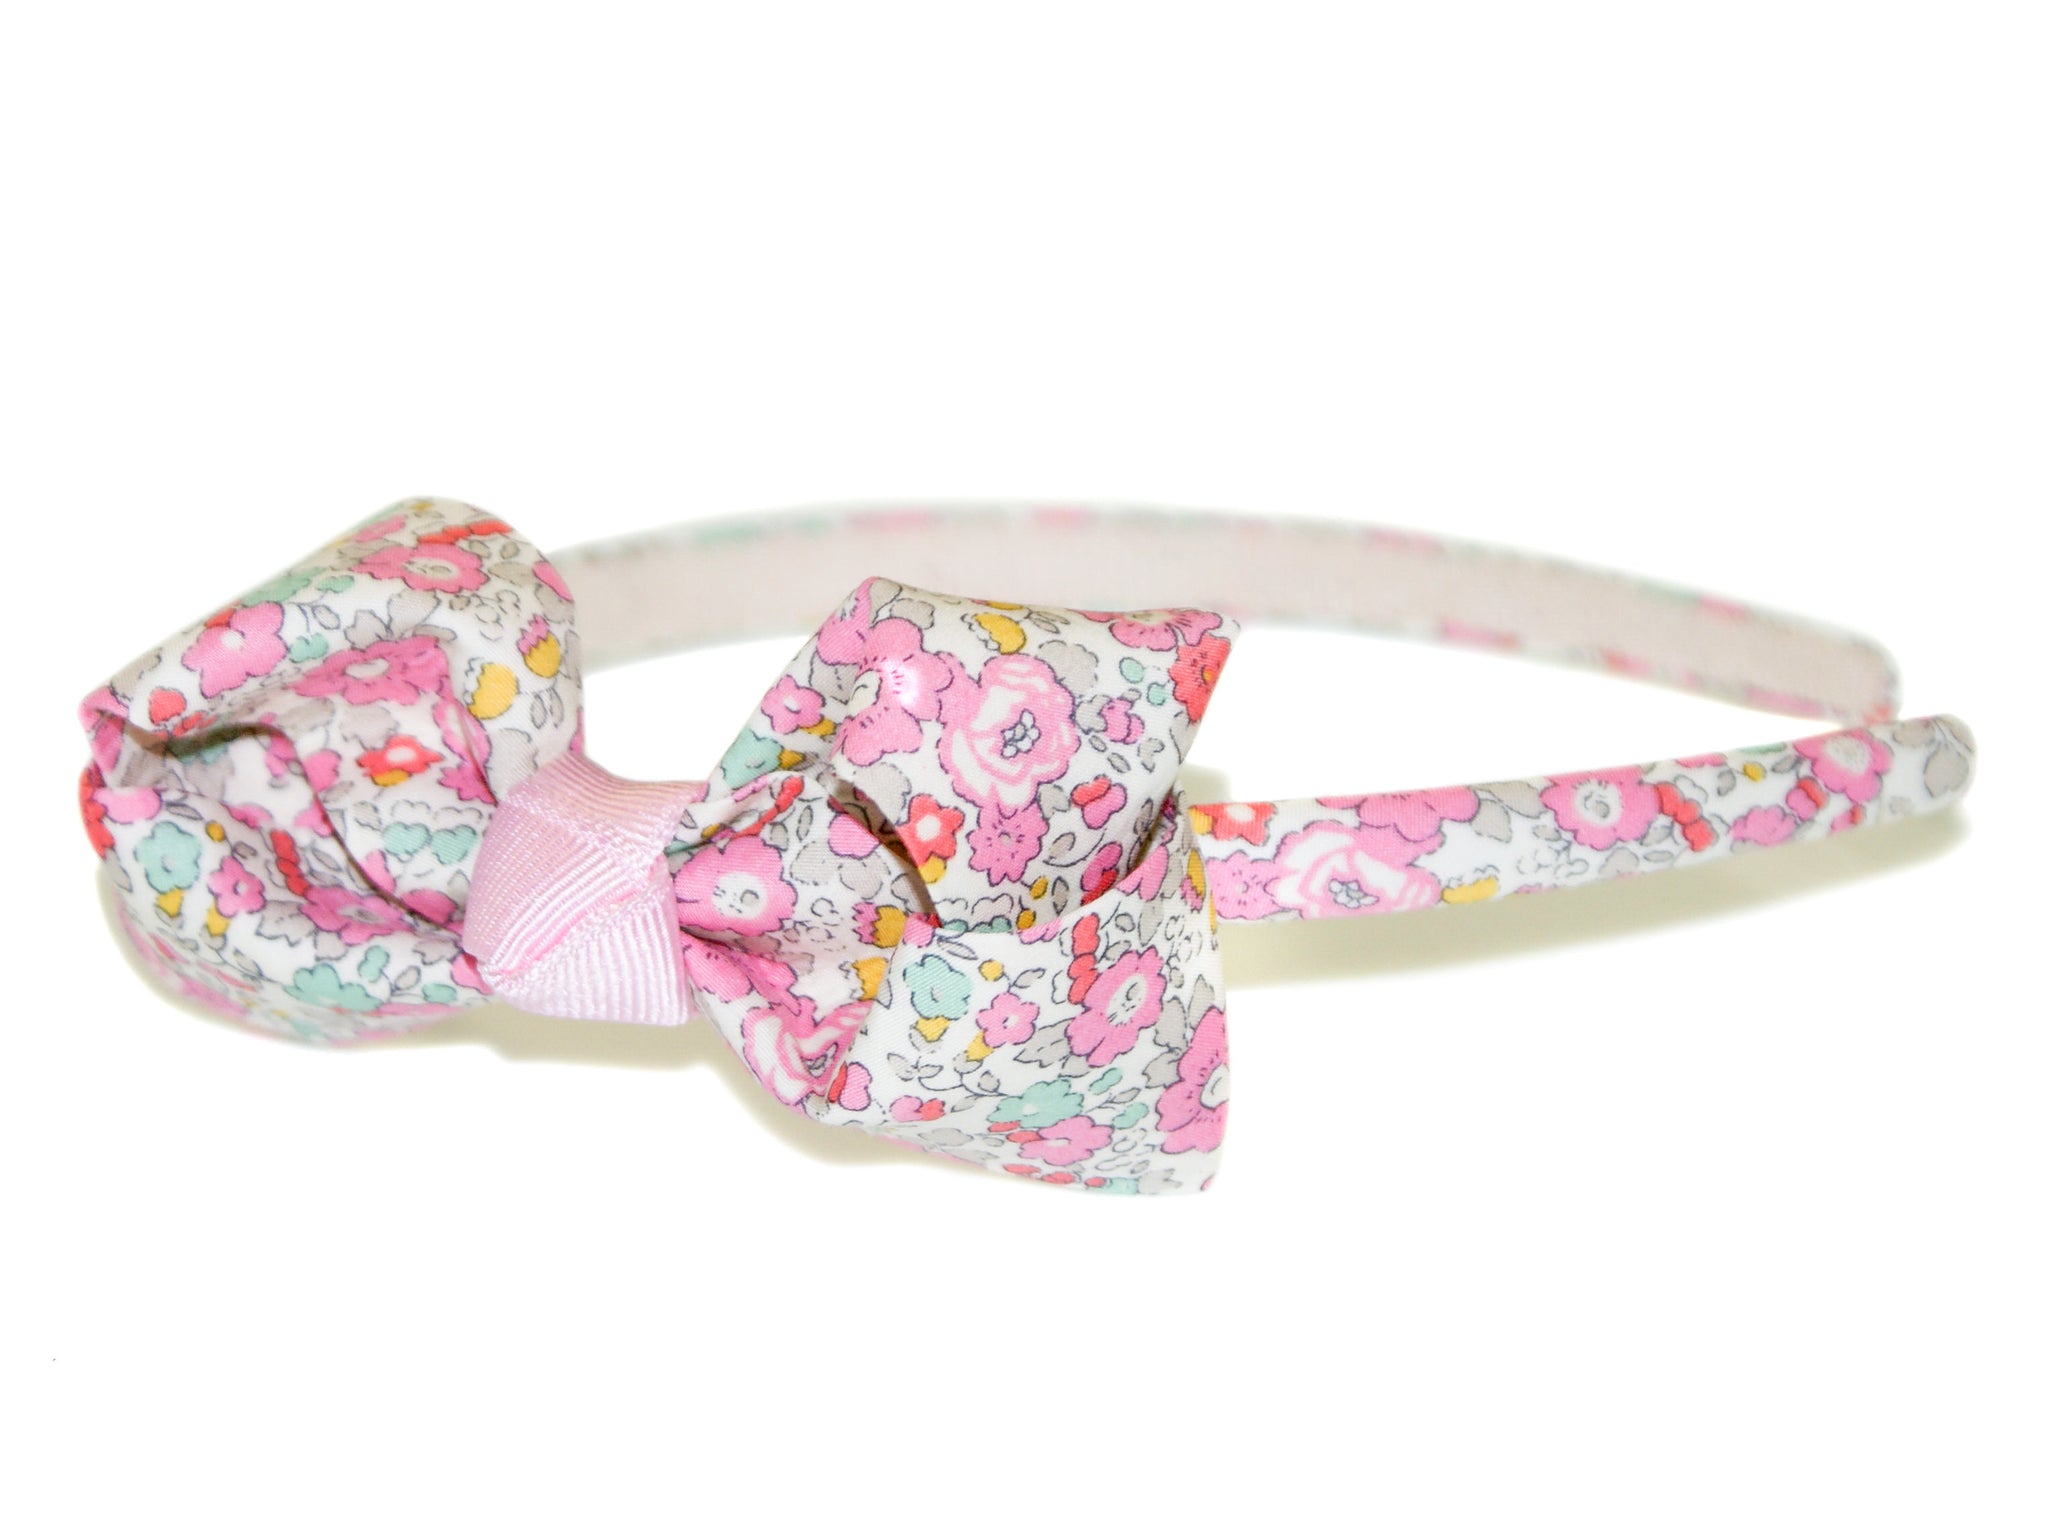 Liberty Betsy Ann Turned Bow Alice Band - Pink-Green